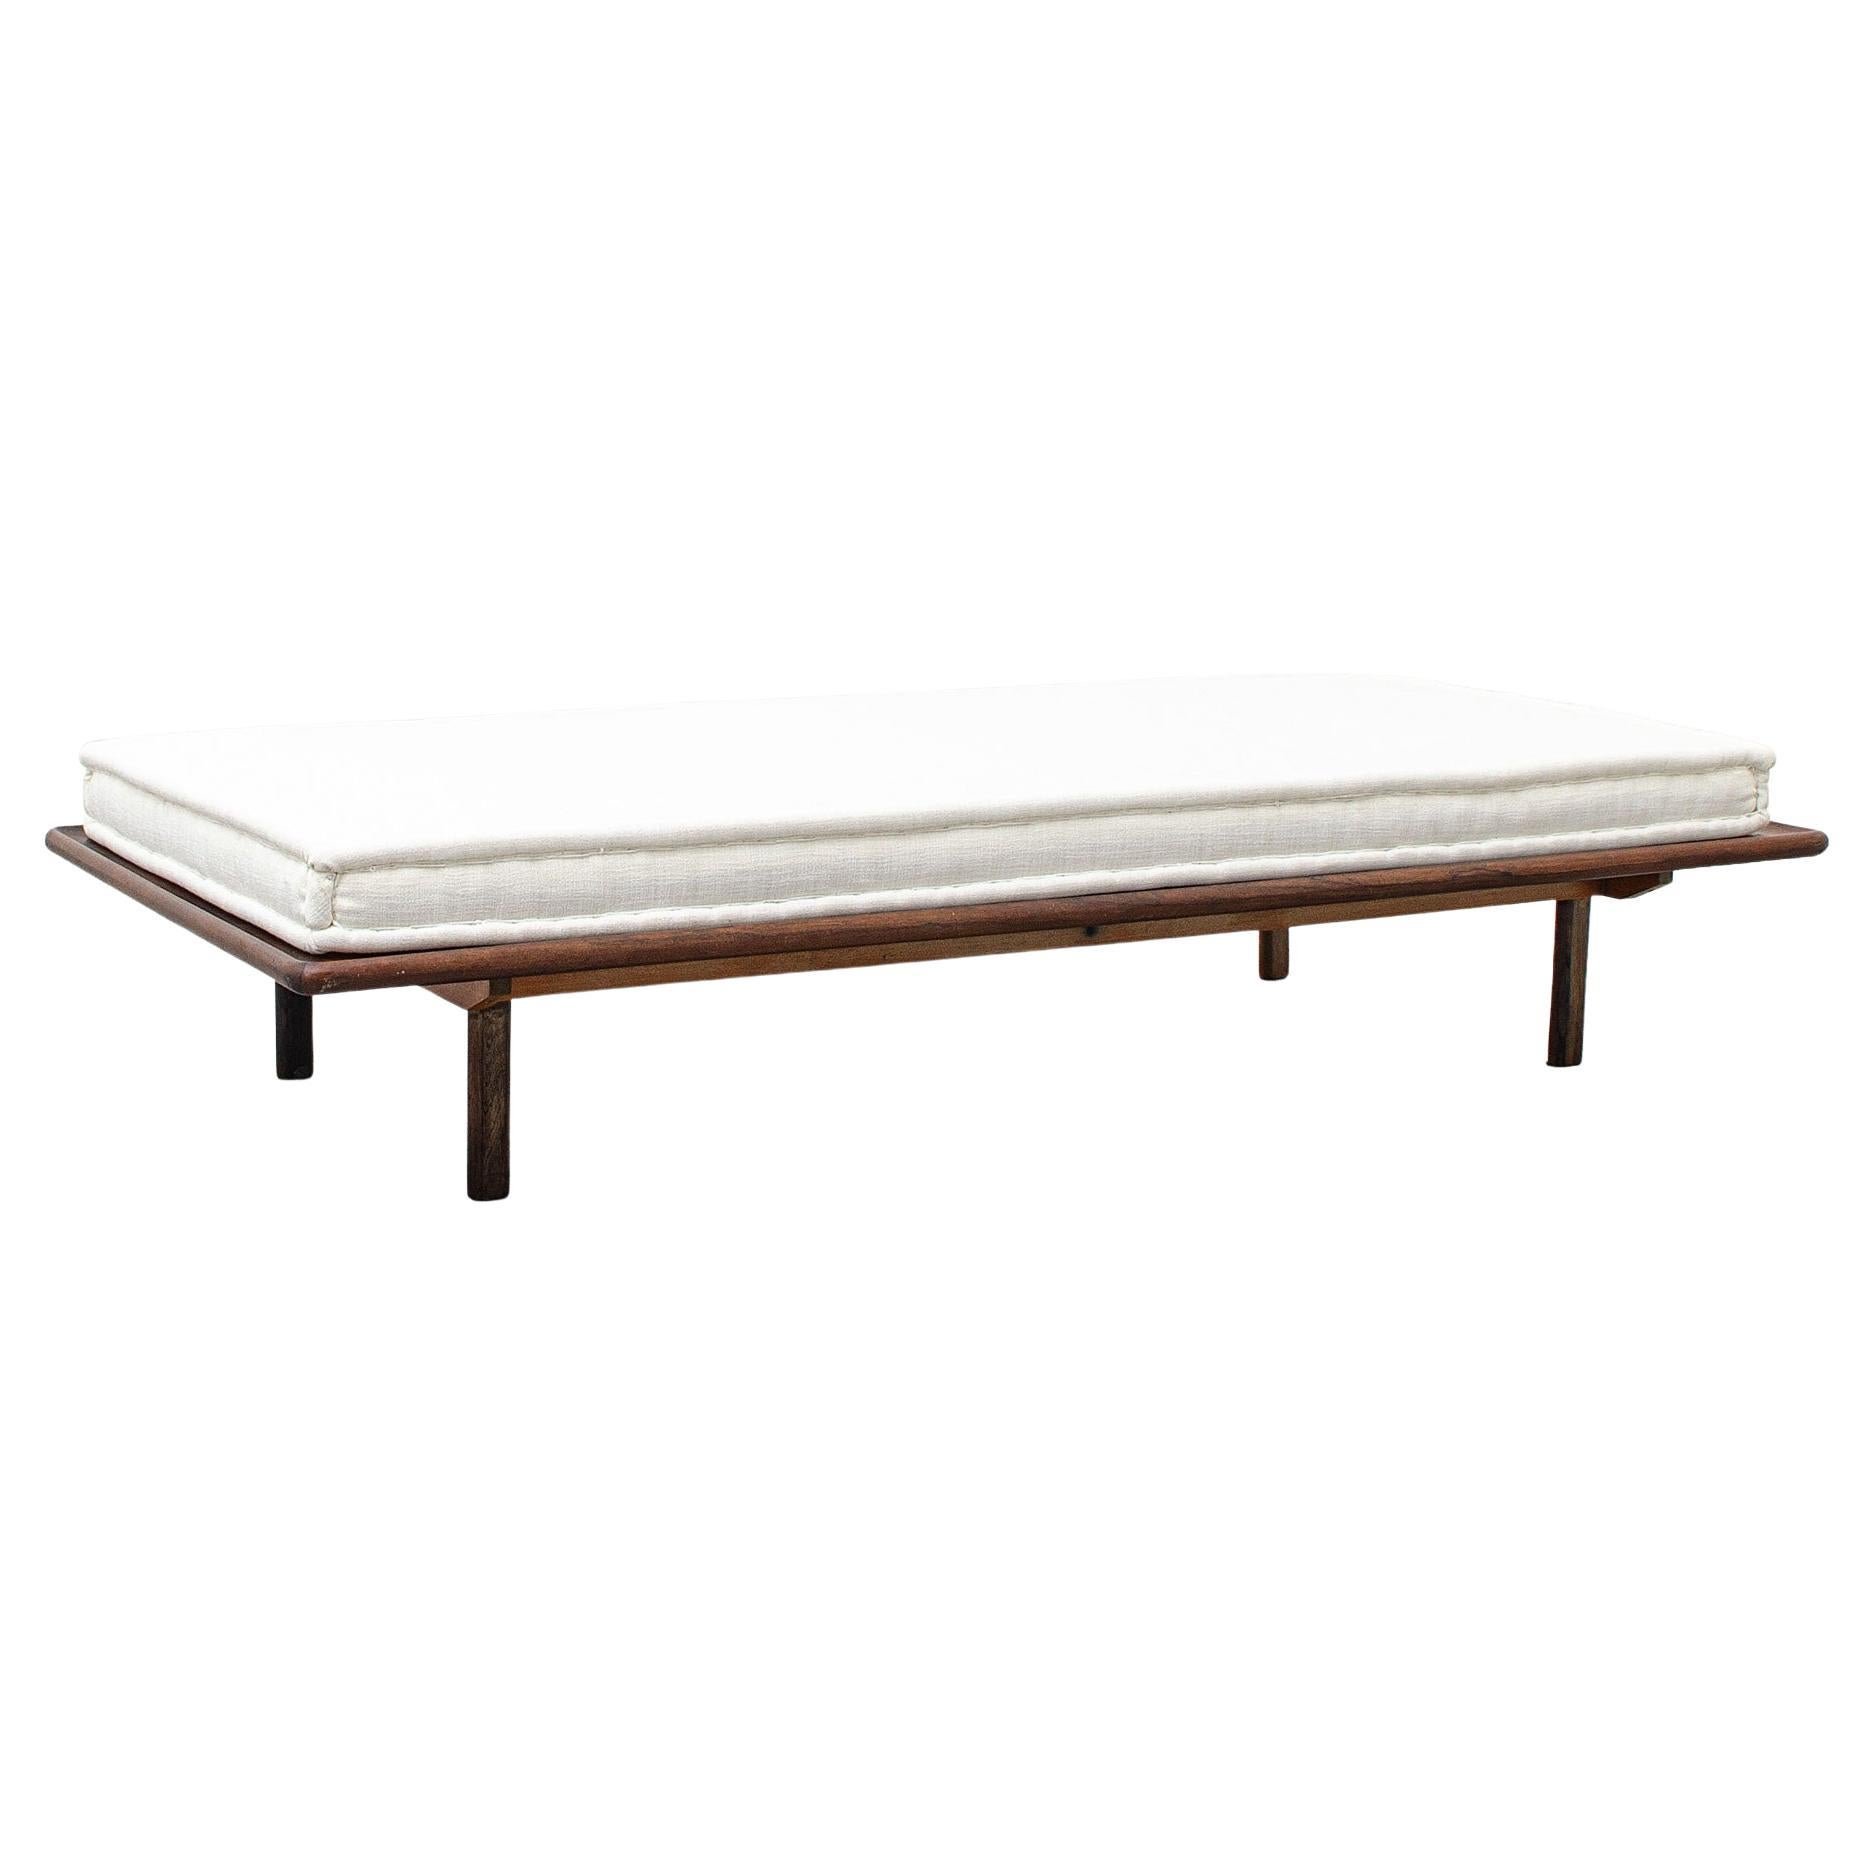 Daybed, by Sergio Rodrigues, 1960 Brazilian Mid-Century Modern